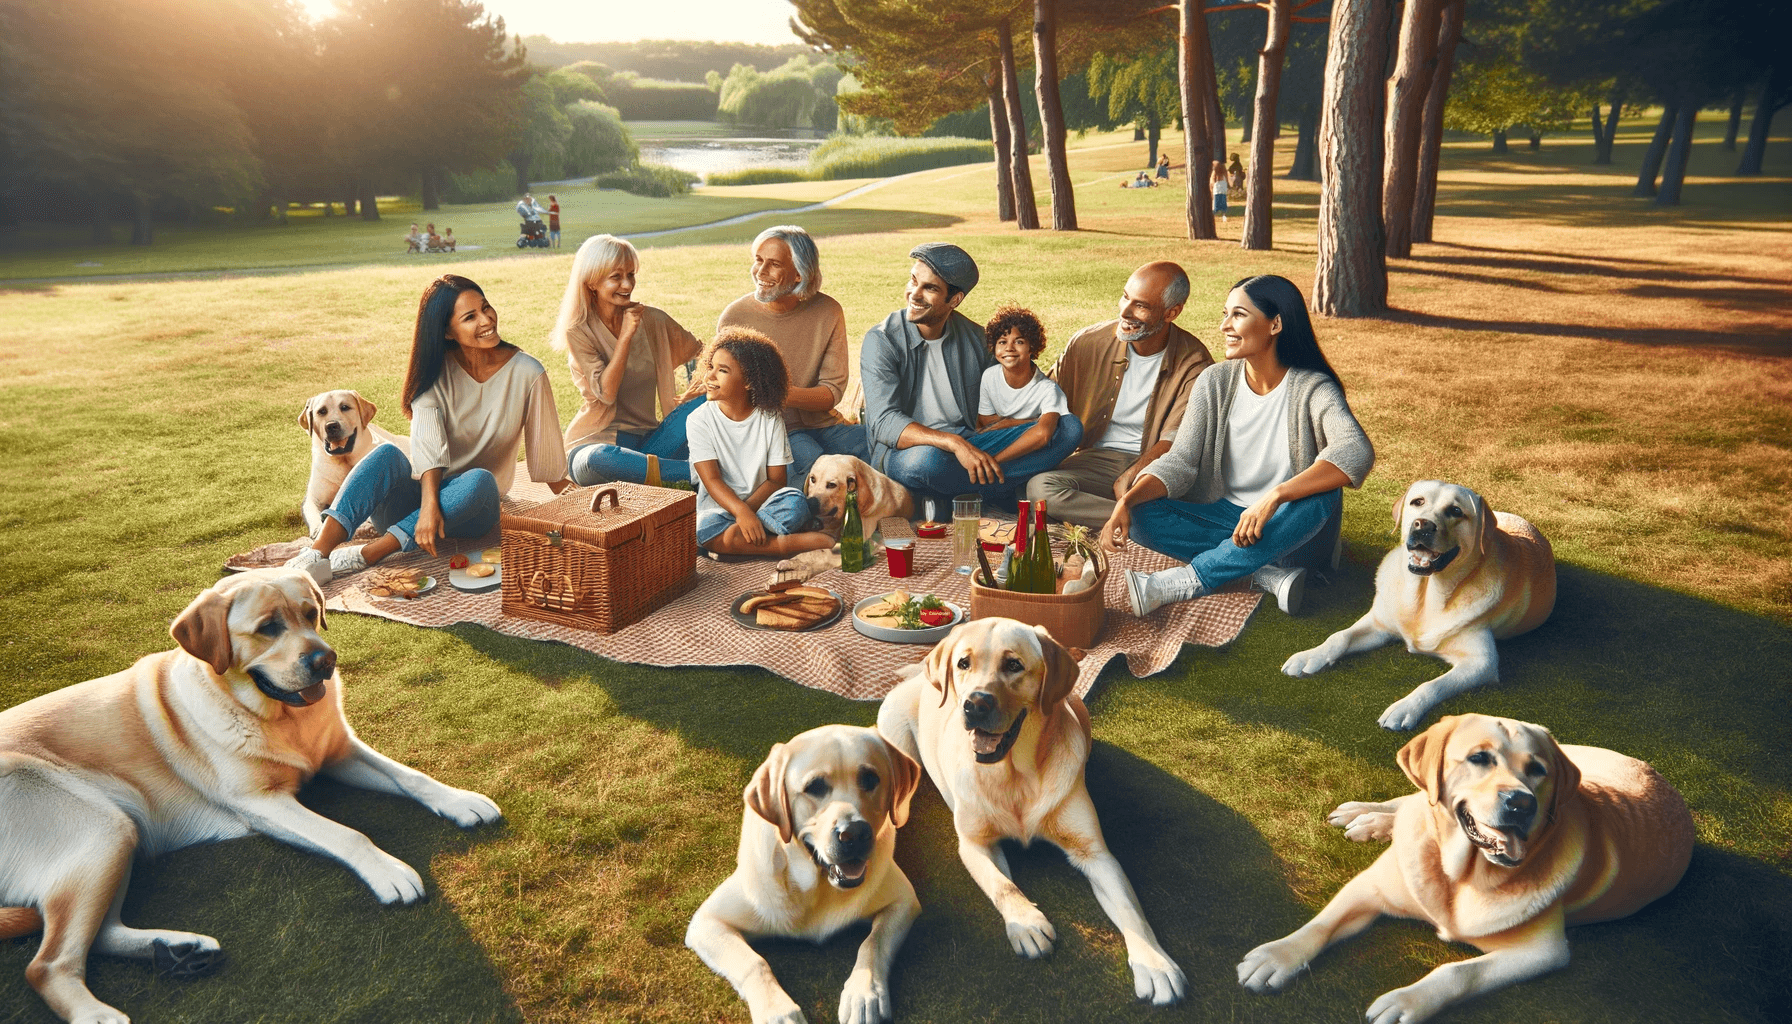 Heartwarming scene of a family picnic in the park with Labrador Retrievers enjoying the day together. The image shows a diverse family, including adults, children, and Labradors.